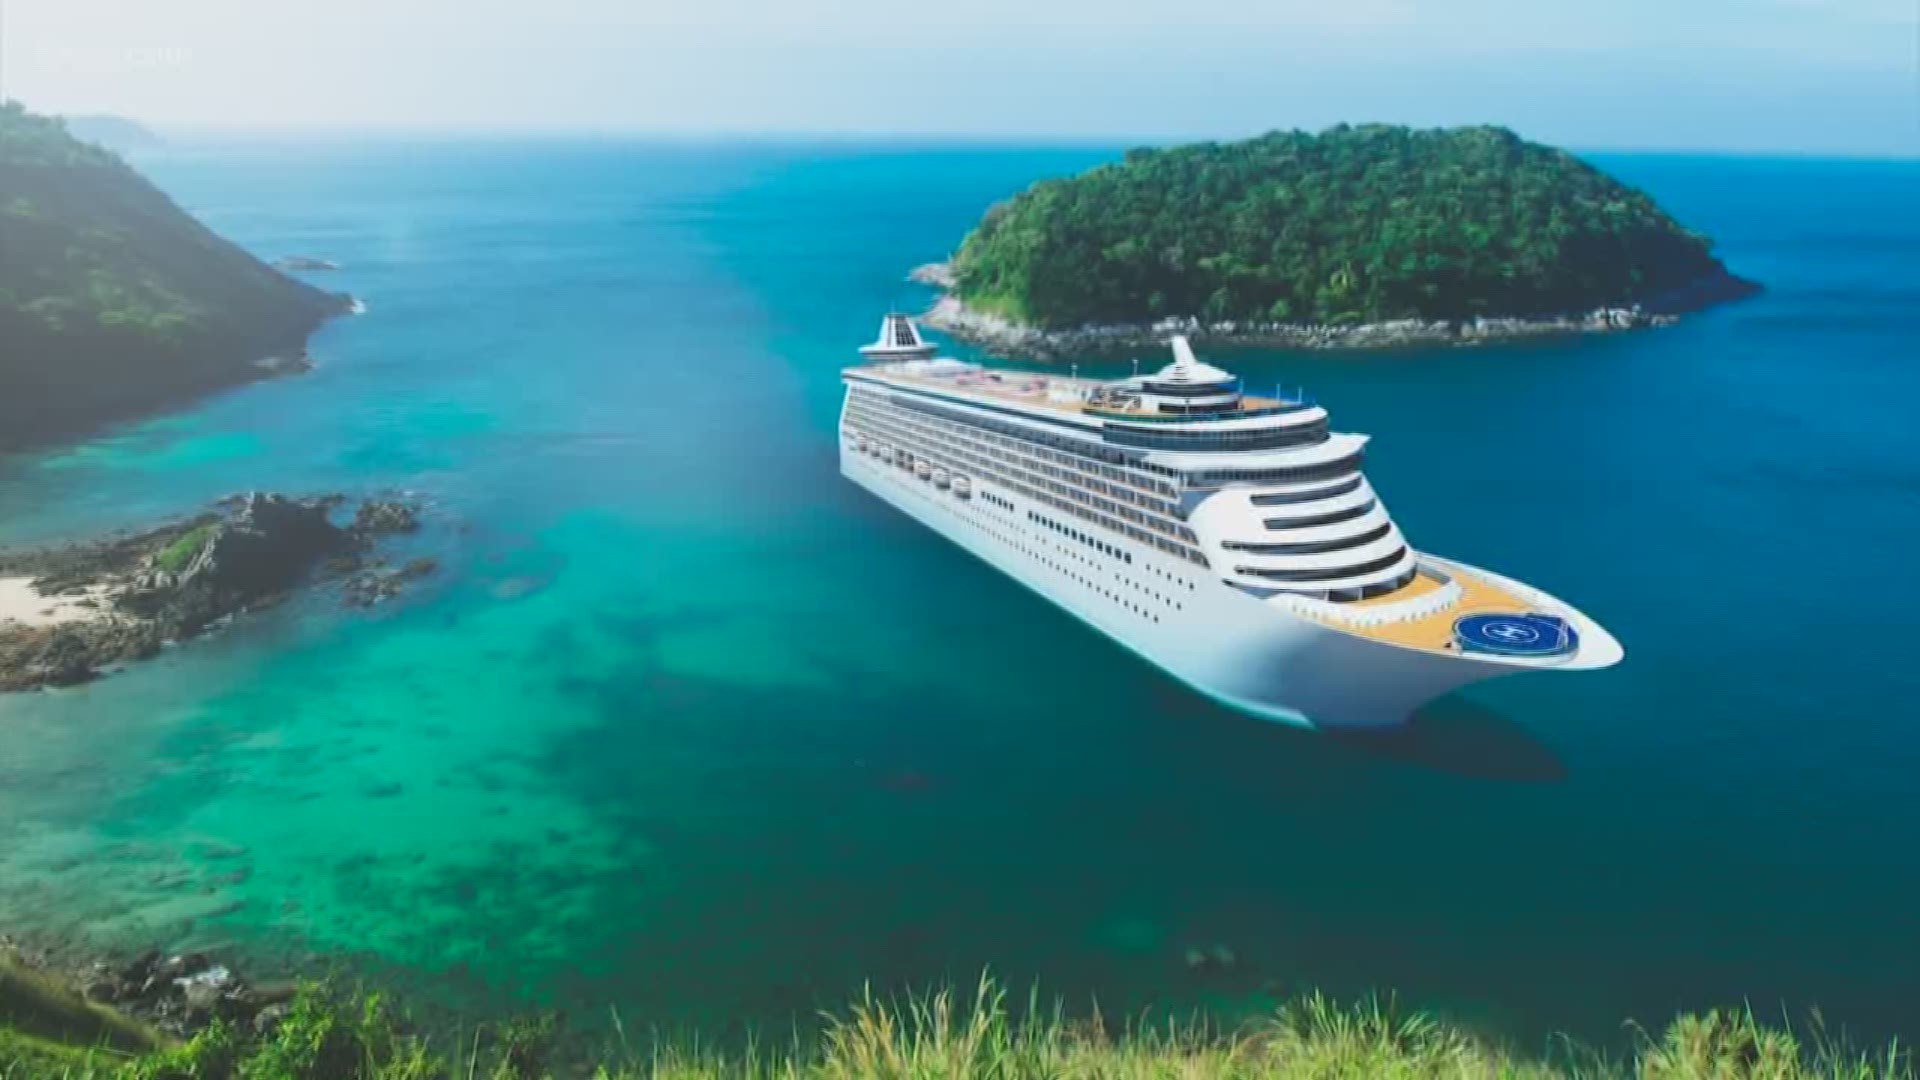 "Cruise wave season" starts in mid-January and runs until March. It's when cruise lines offer some of their best deals and packages for the year.